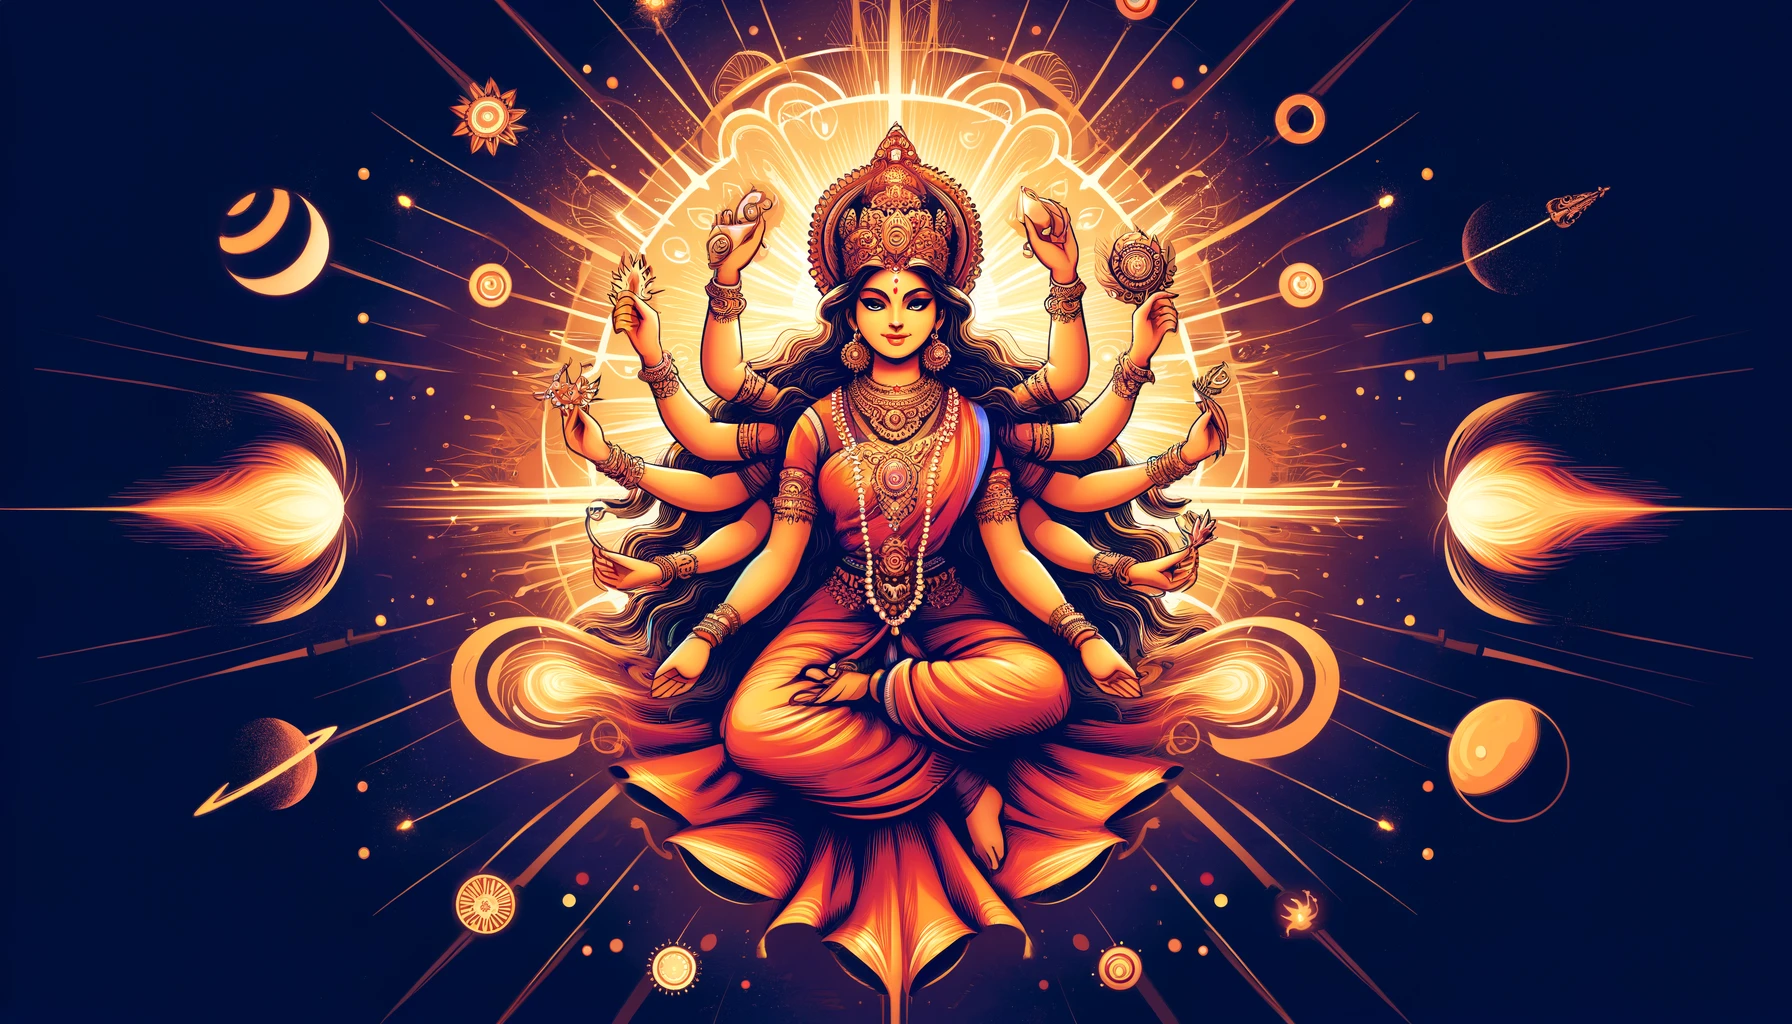 An illustration of Goddess Kushmanda, vibrant and powerful, for the fourth day of Navratri. The image should show her with eight arms, each holding sy